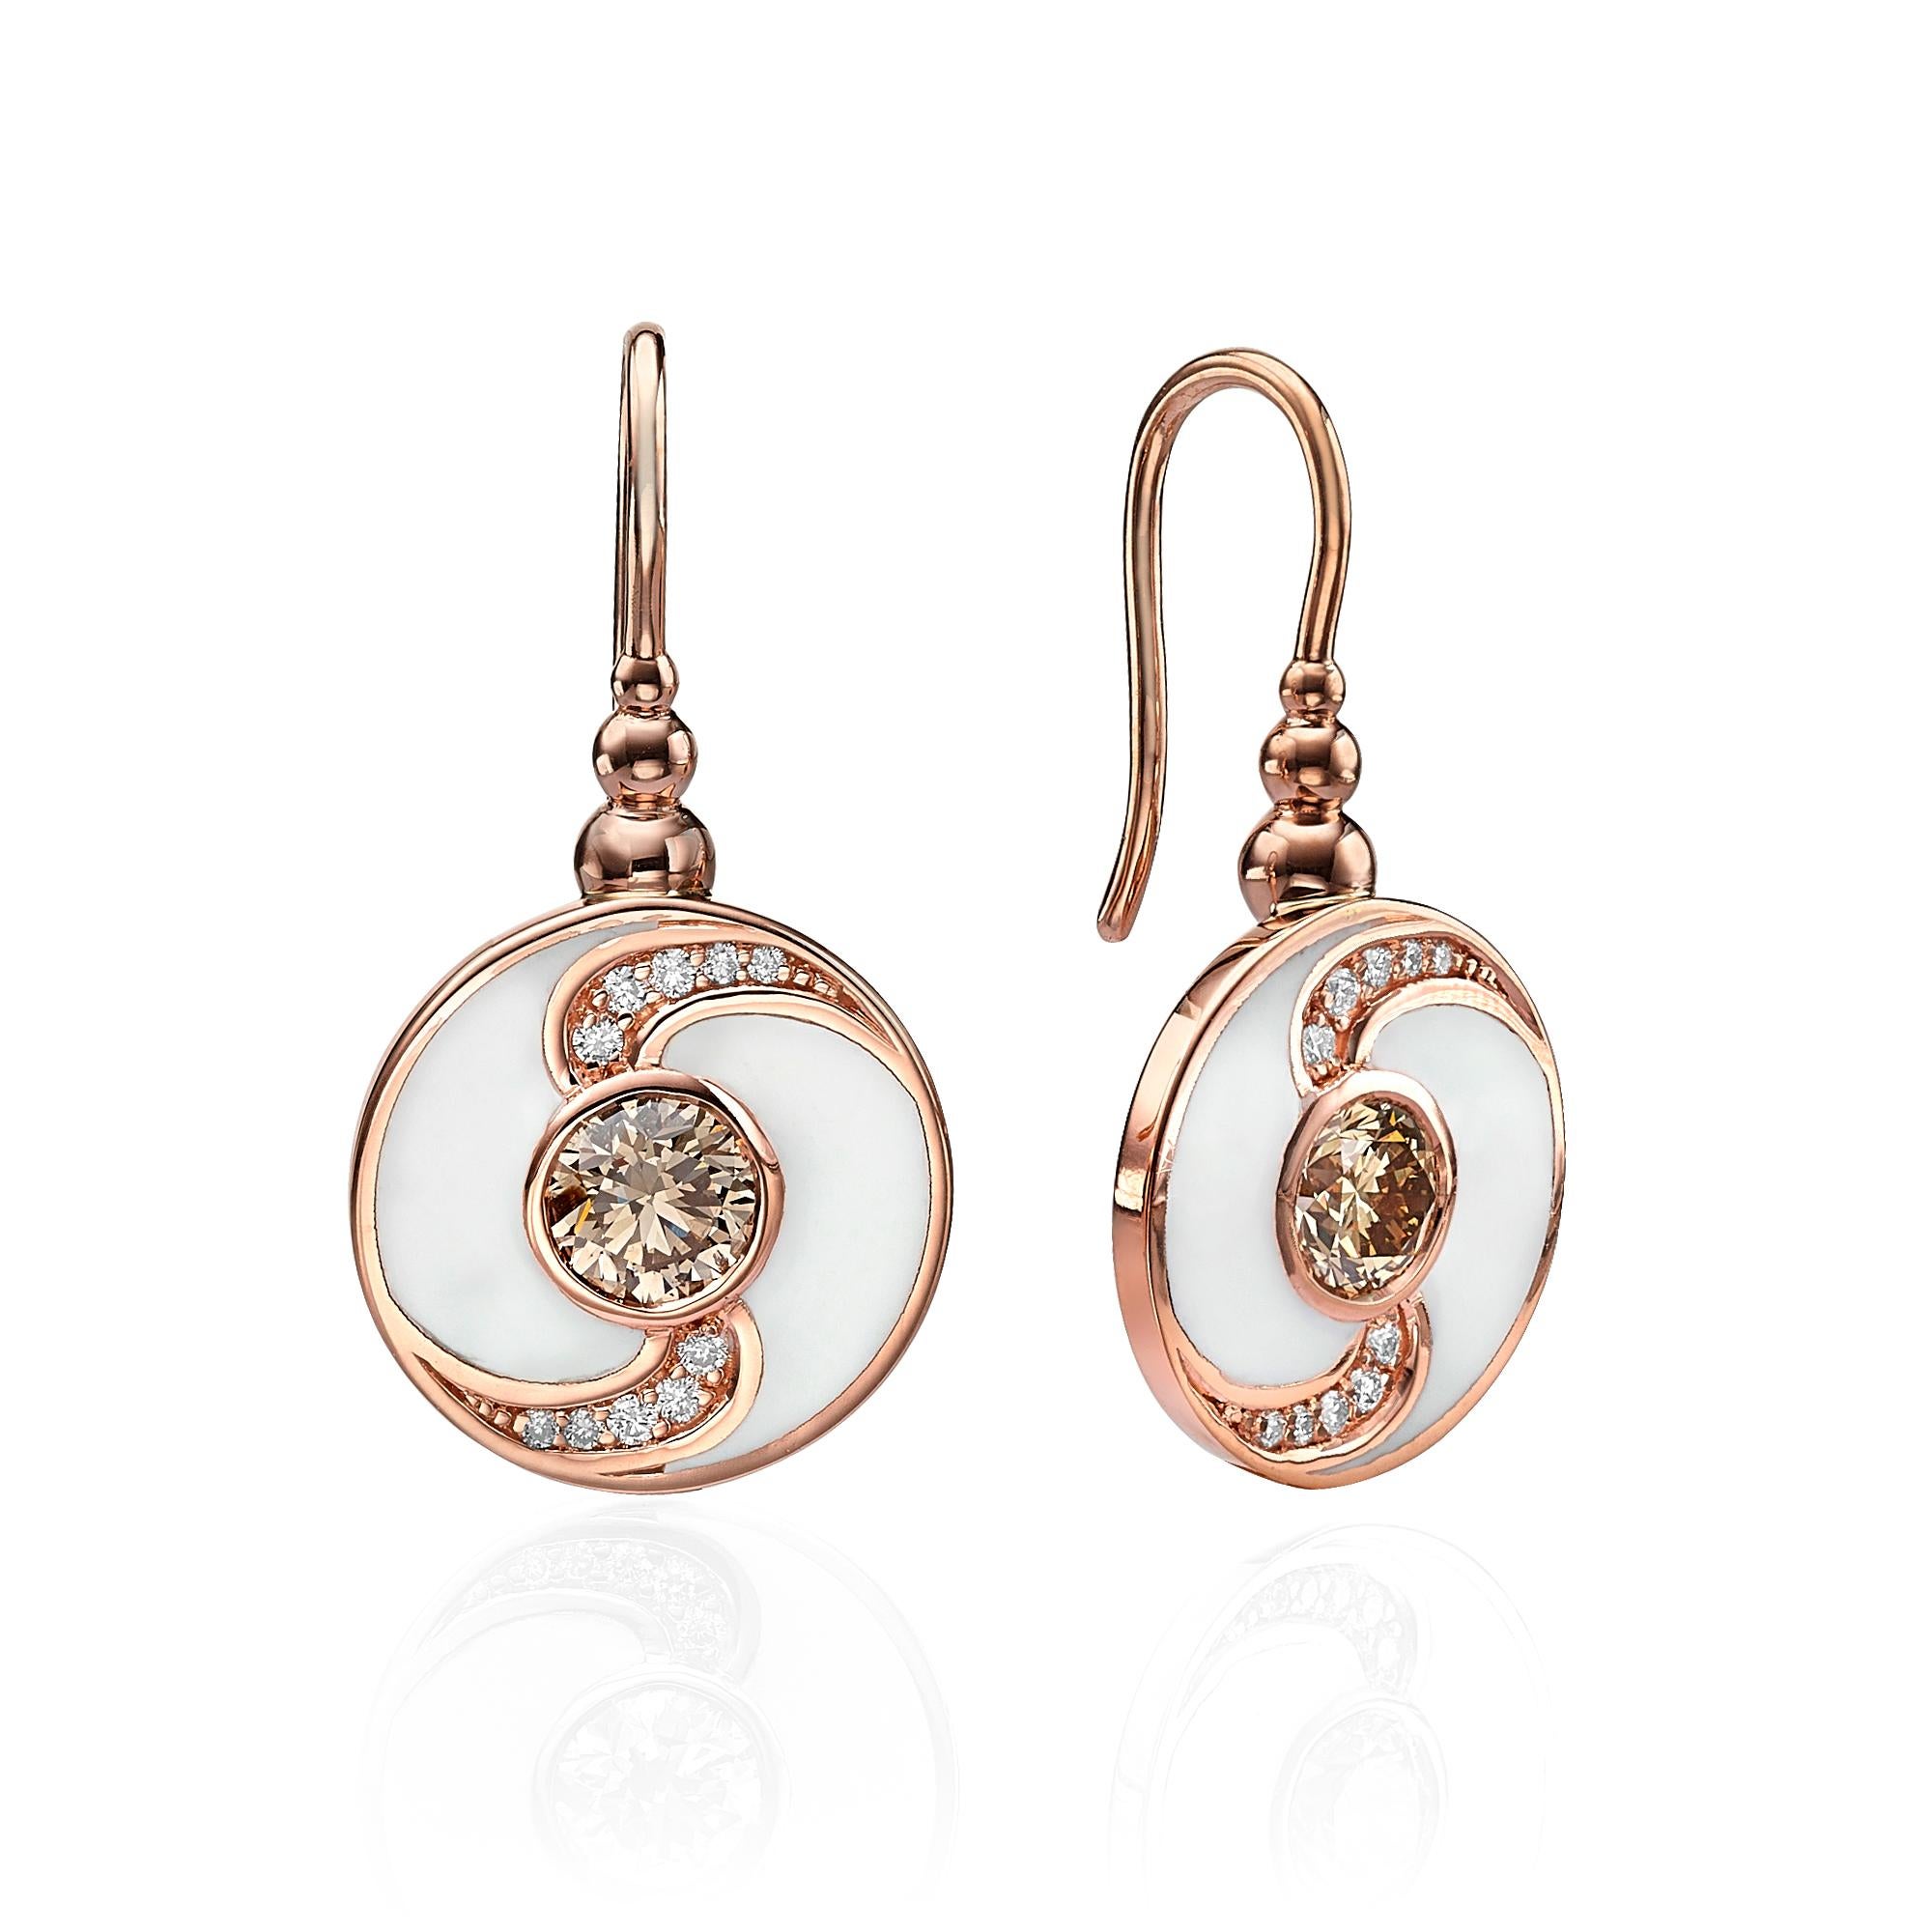 SKU# 4006110

Drop round-shaped earrings crafted with 18k rose gold. The earrings feature two central round fancy orangy brown diamonds with a total weight of 1.43 carats, creating a striking focal point and adding a warm and luxurious touch to